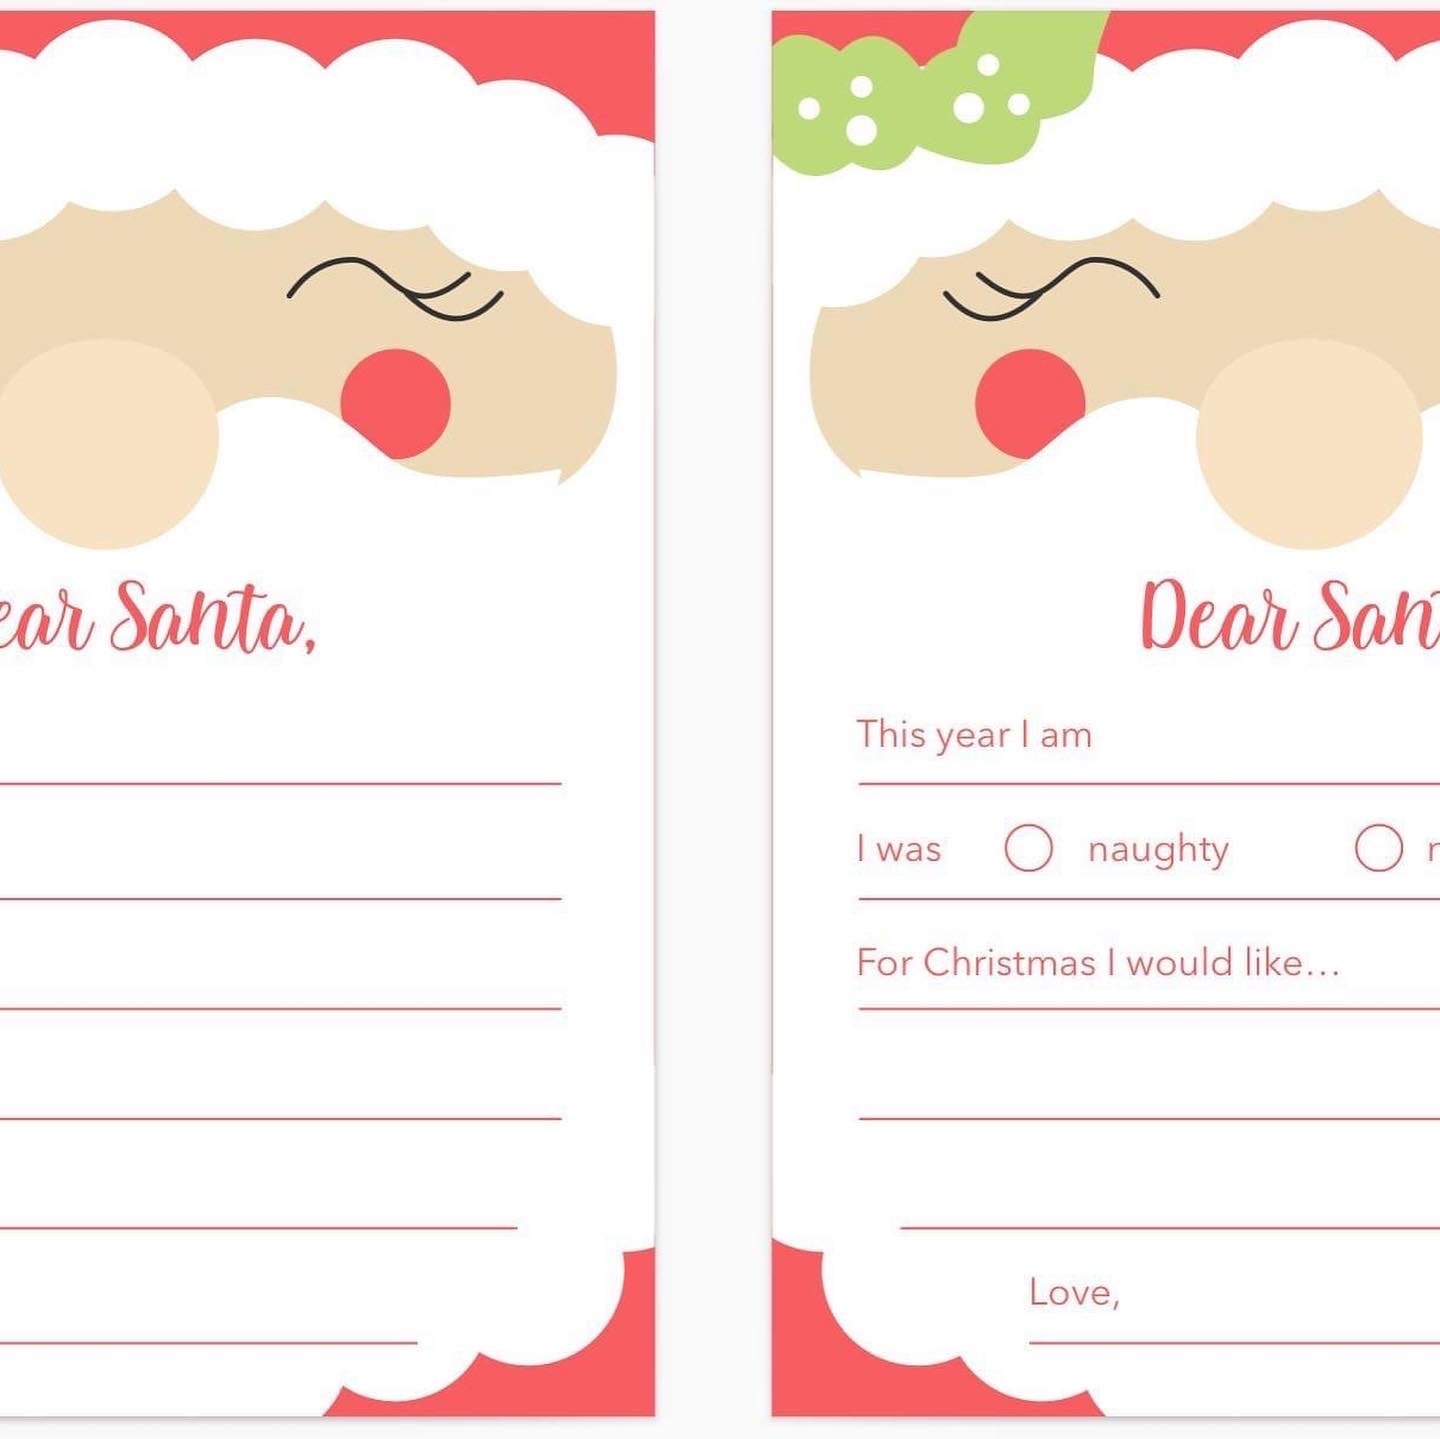 How to send a letter to the north pole